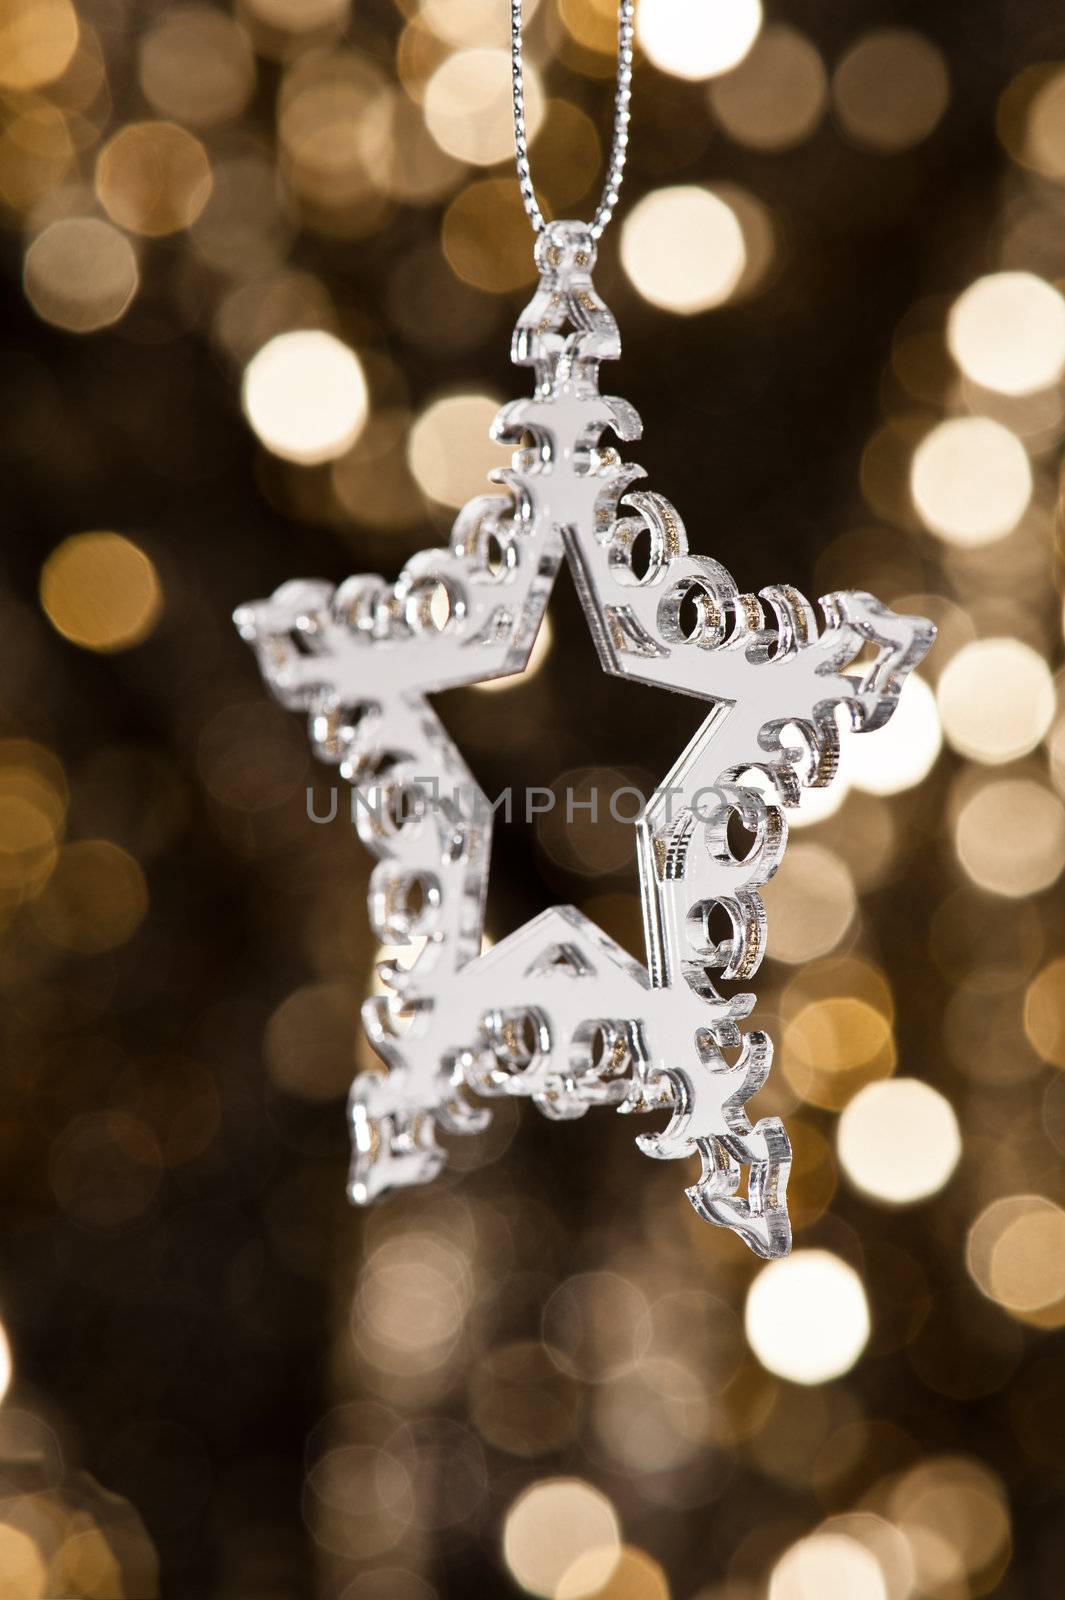 Christmas tree ornament with mirror effect over golden background